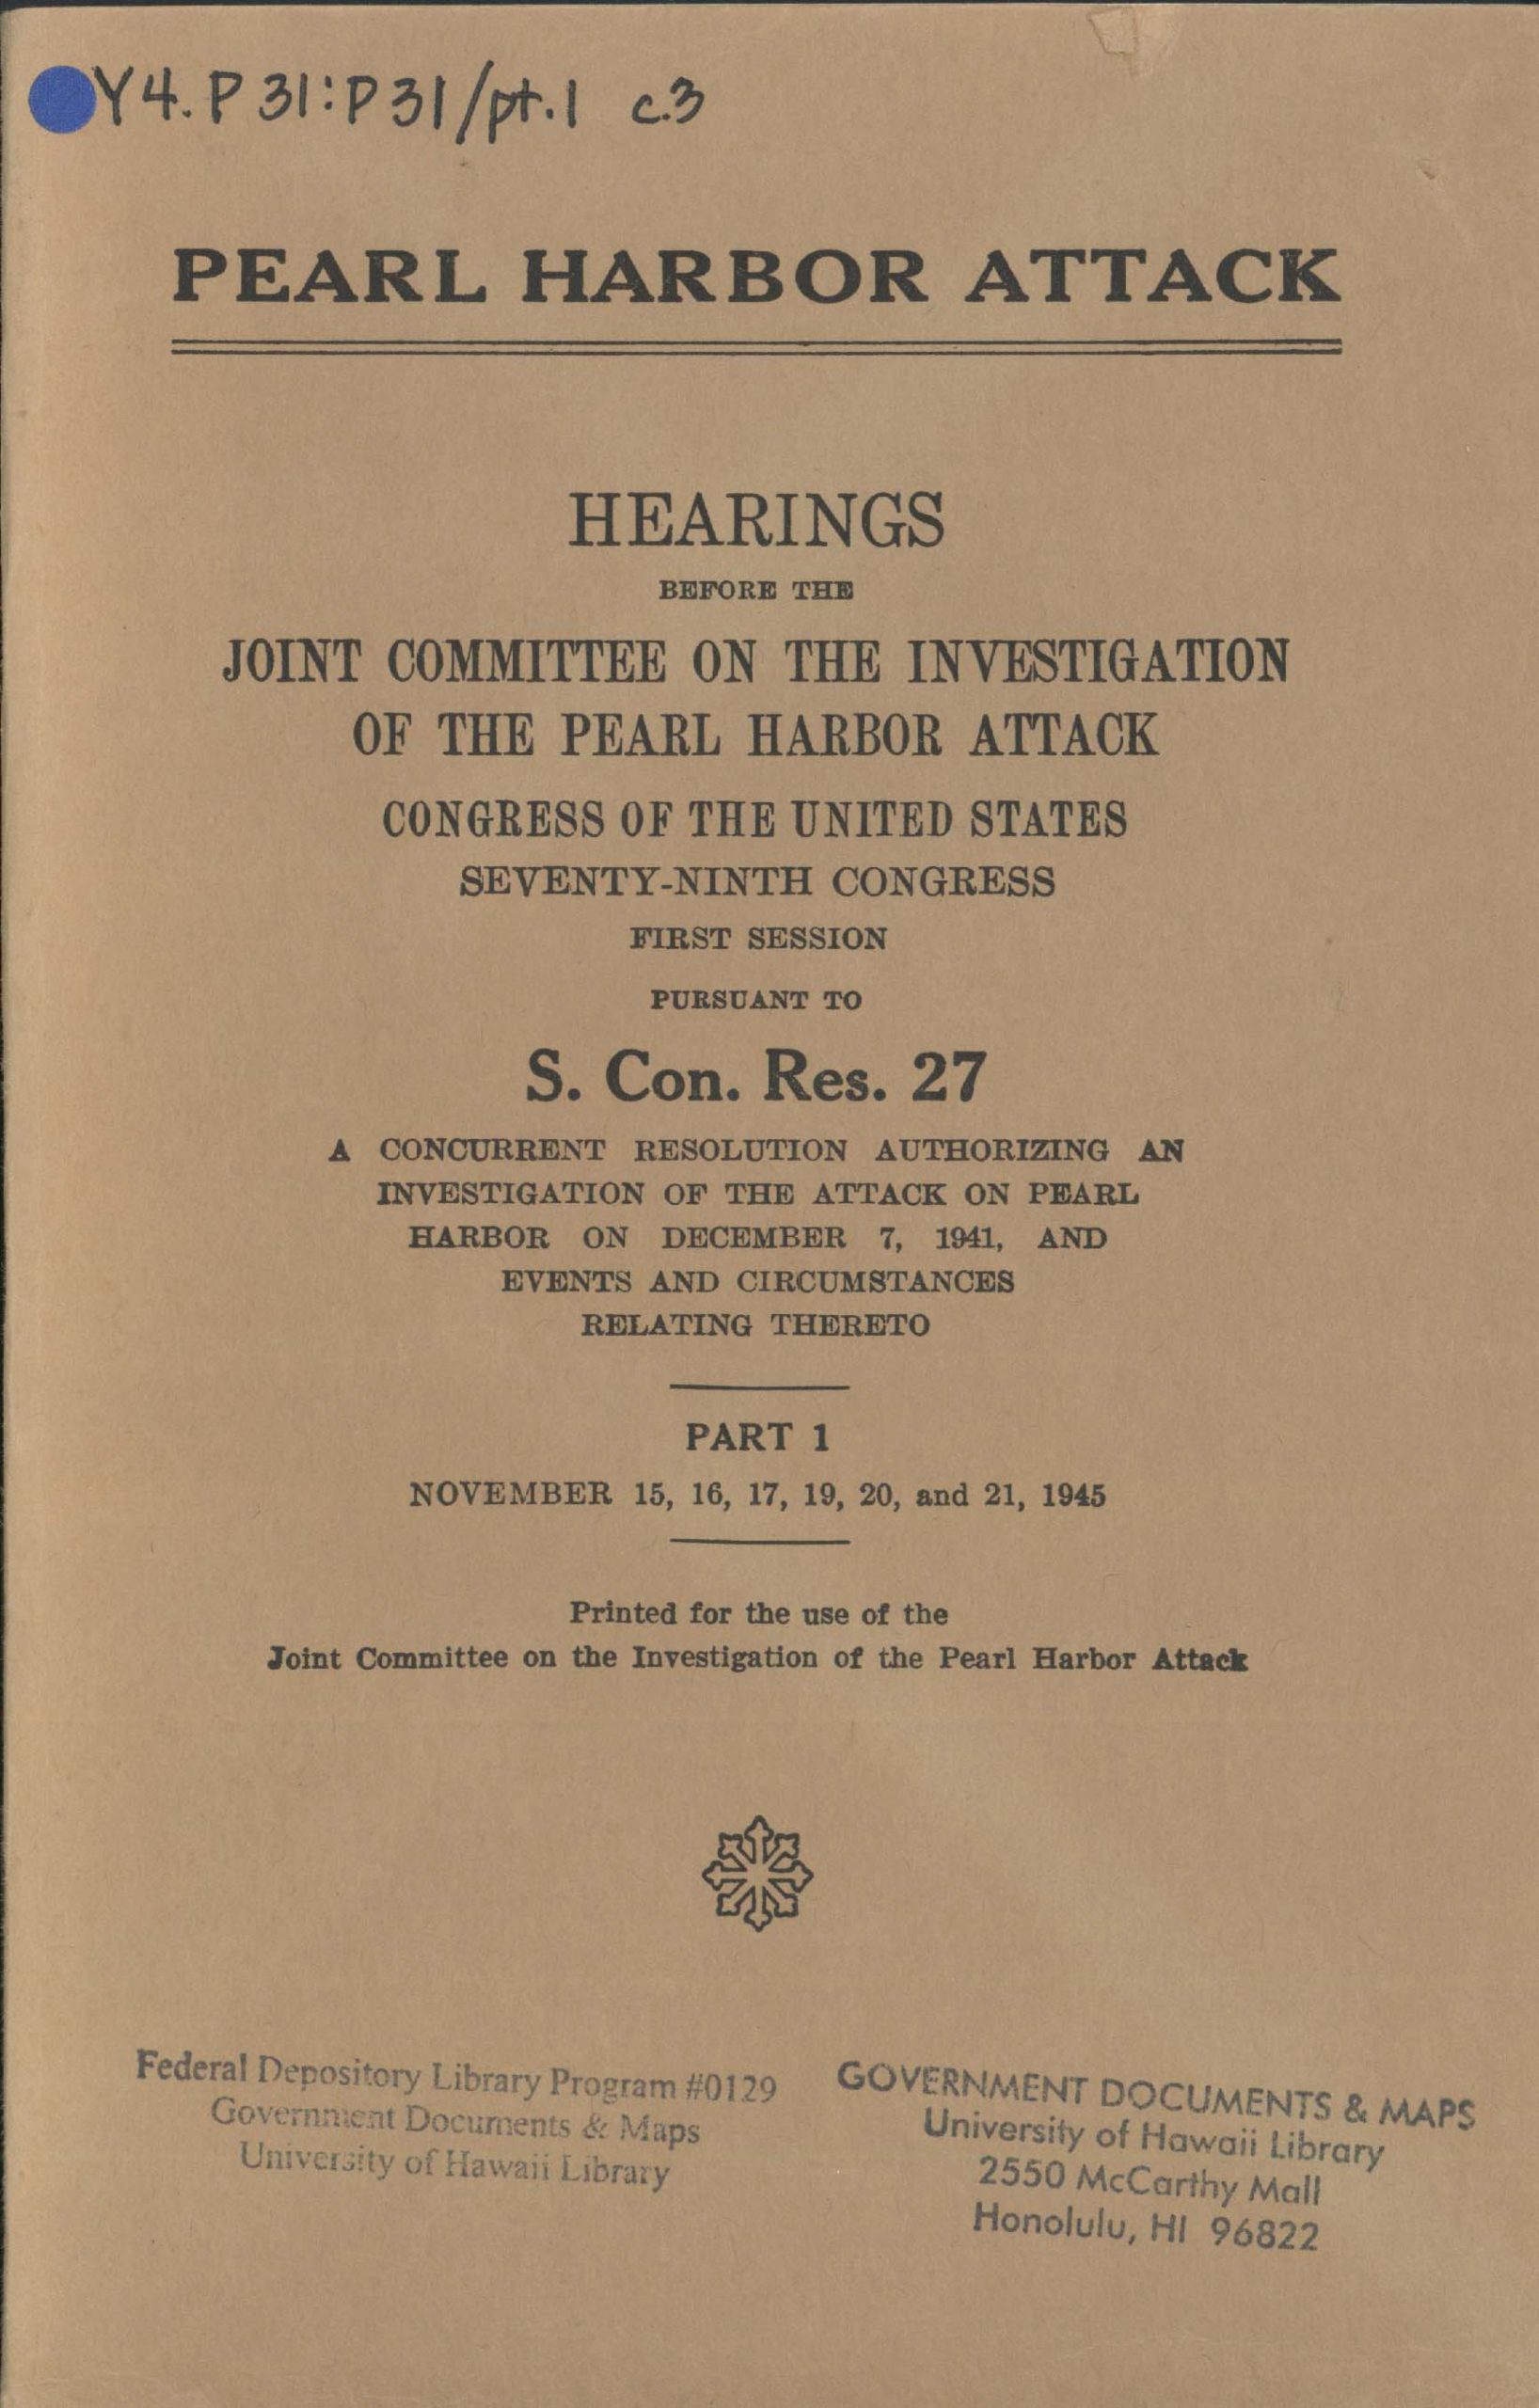 Cover of a volume of the Pearl Harbor attack hearings